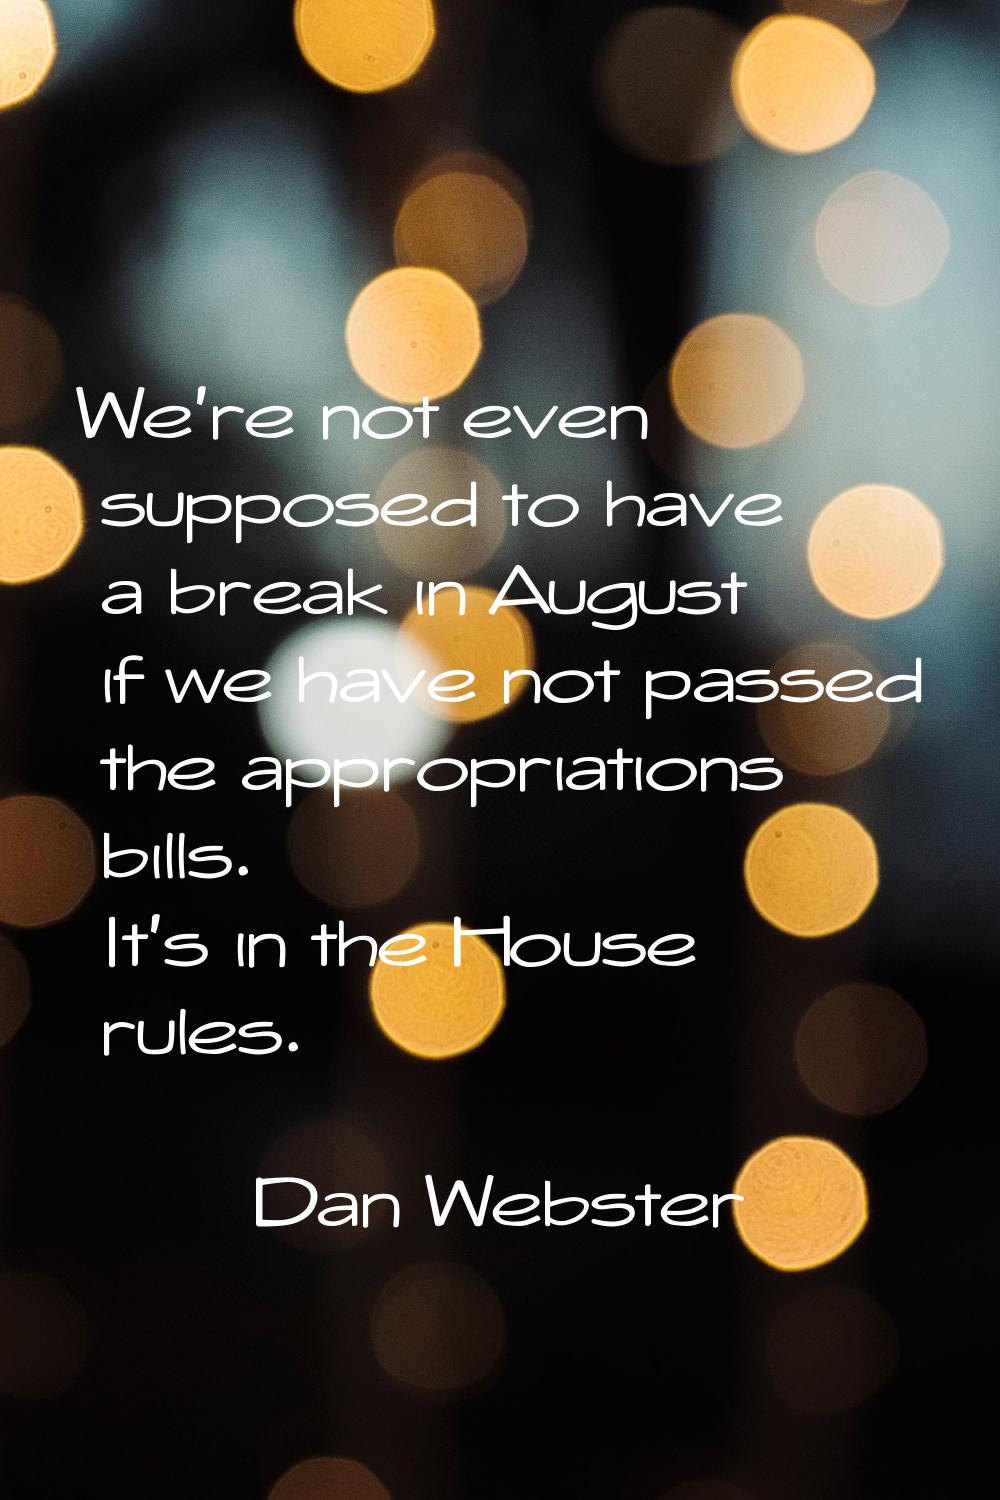 We're not even supposed to have a break in August if we have not passed the appropriations bills. I